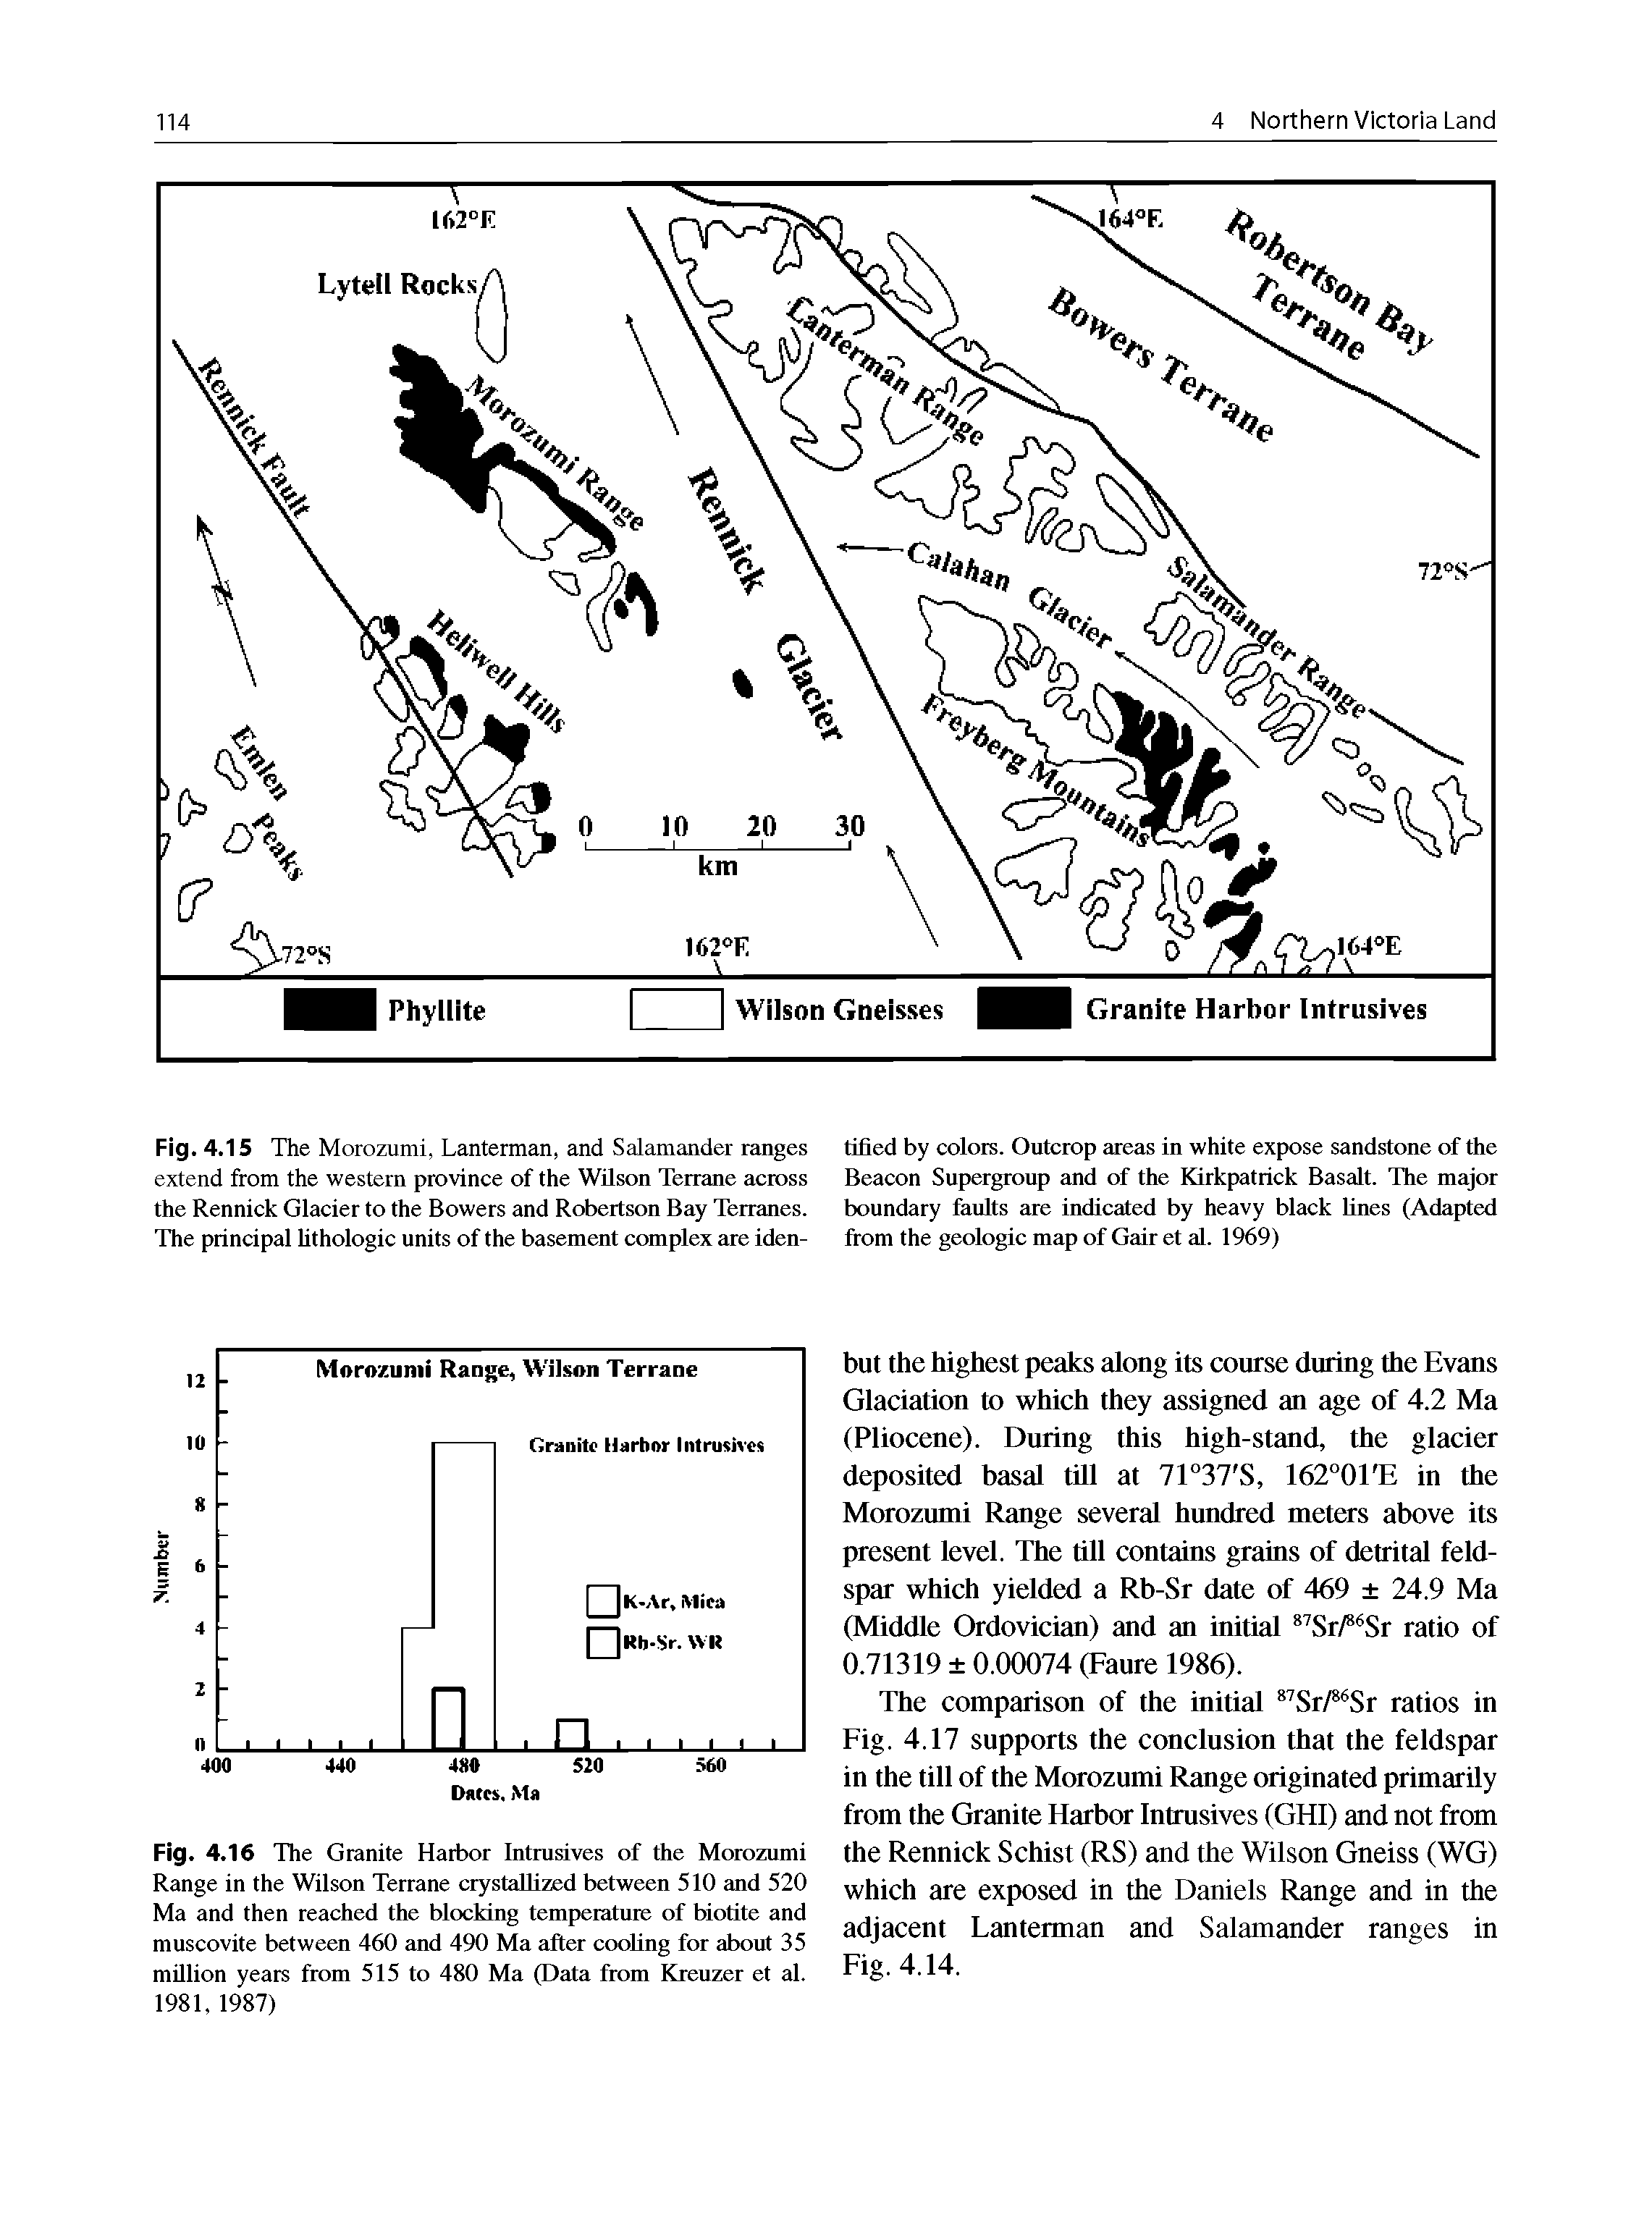 Fig. 4.16 The Granite Harbor Intrusives of the Morozumi Remge in the Wilson Terrane crystaUized between 510 and 520 Ma and then reached the blocking temperature of biotite and muscovite between 460 and 490 Ma after coofing for about 35 million years fiom 515 to 480 Ma (Data from Kreuzer et al. 1981, 1987)...